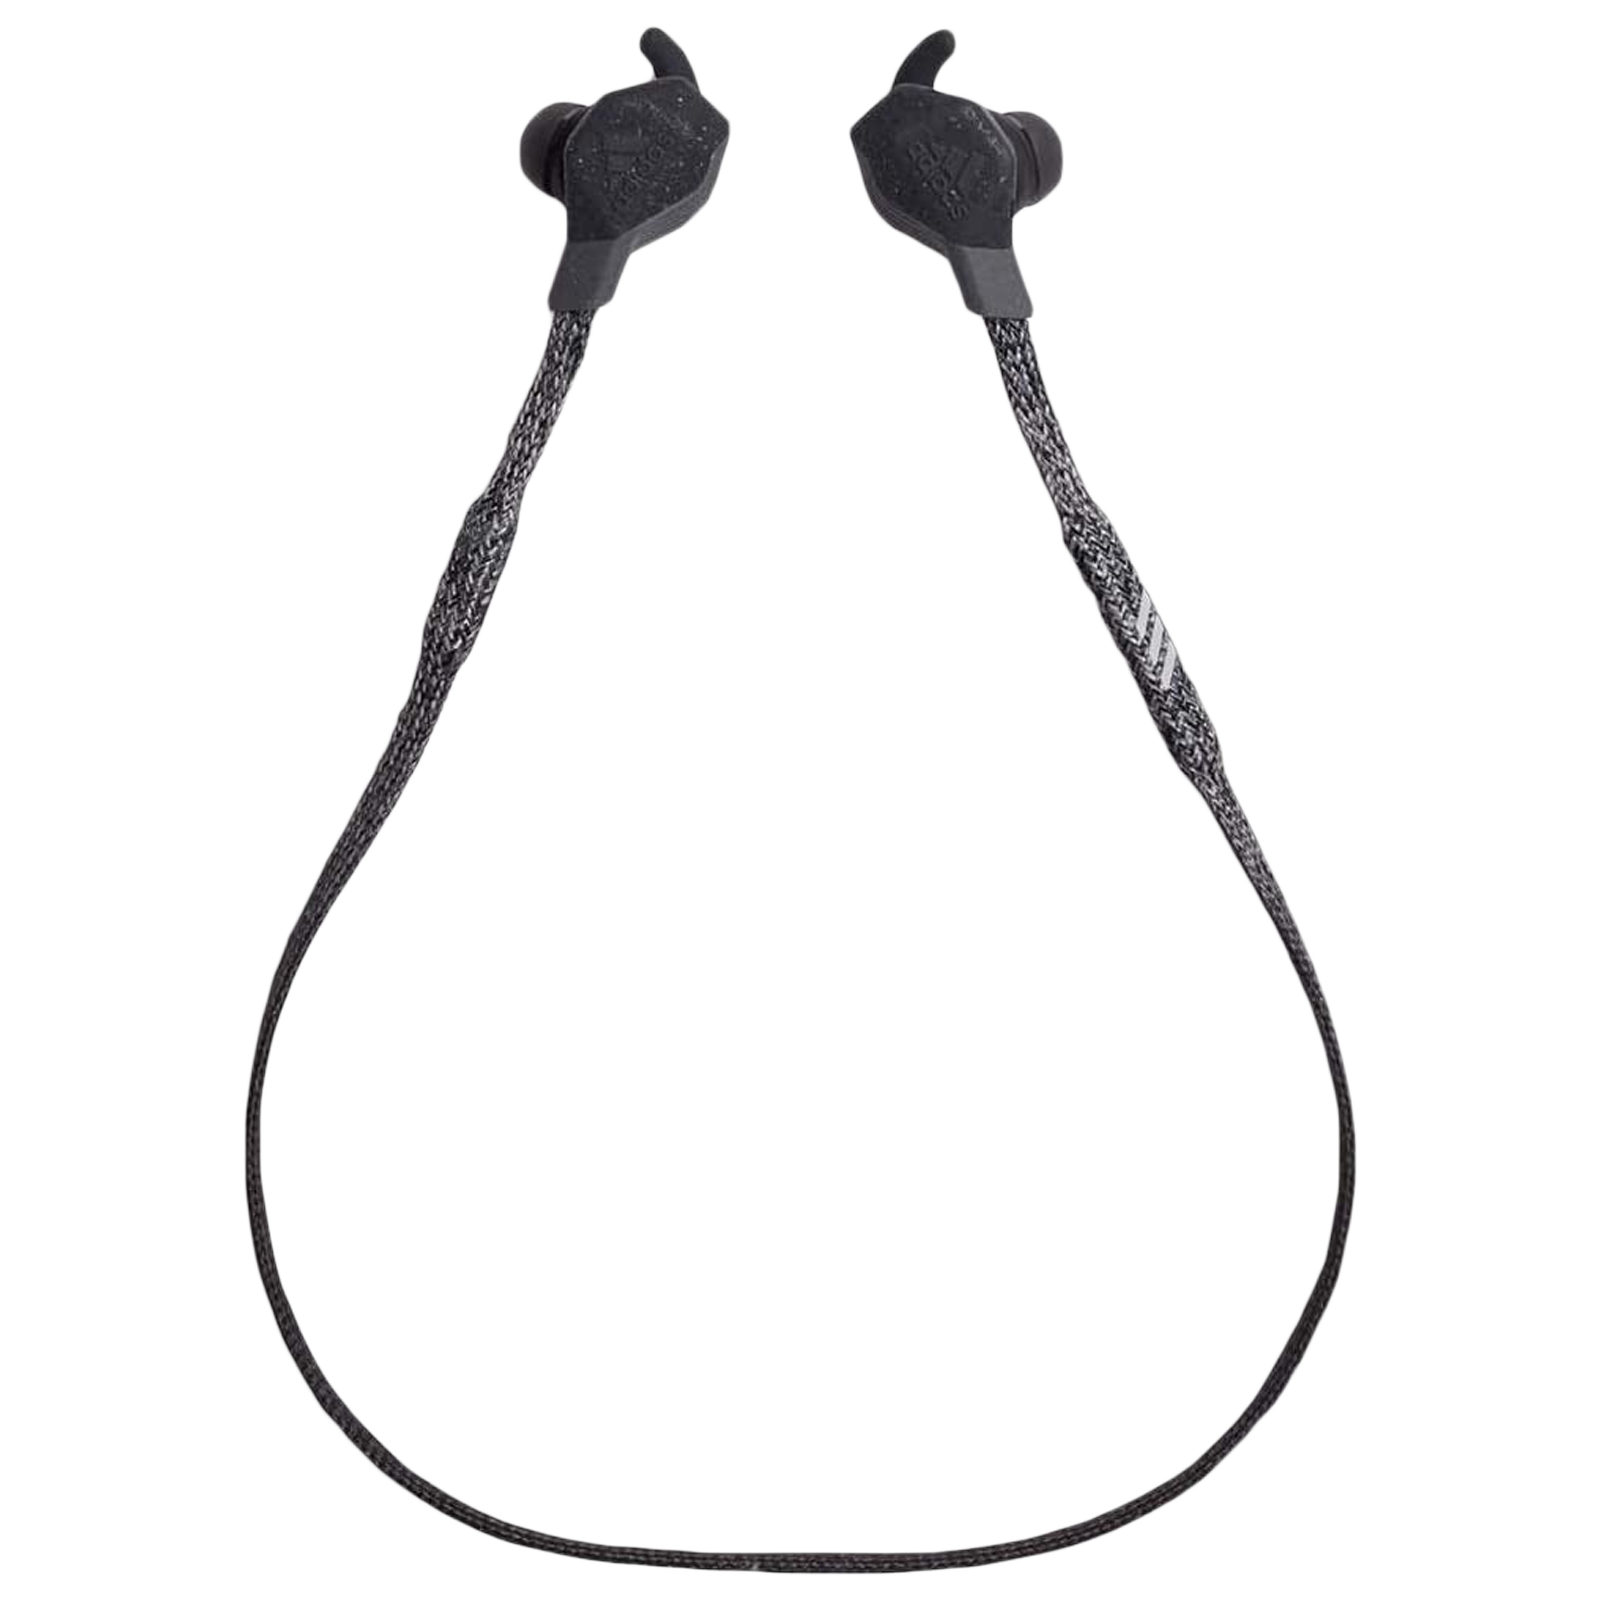 Adidas FWD-01 AD-FWD01-NGRY In-Ear Wireless Earphone with Mic (Bluetooth 5.0, Fast Charging Capability, Night Grey)_1